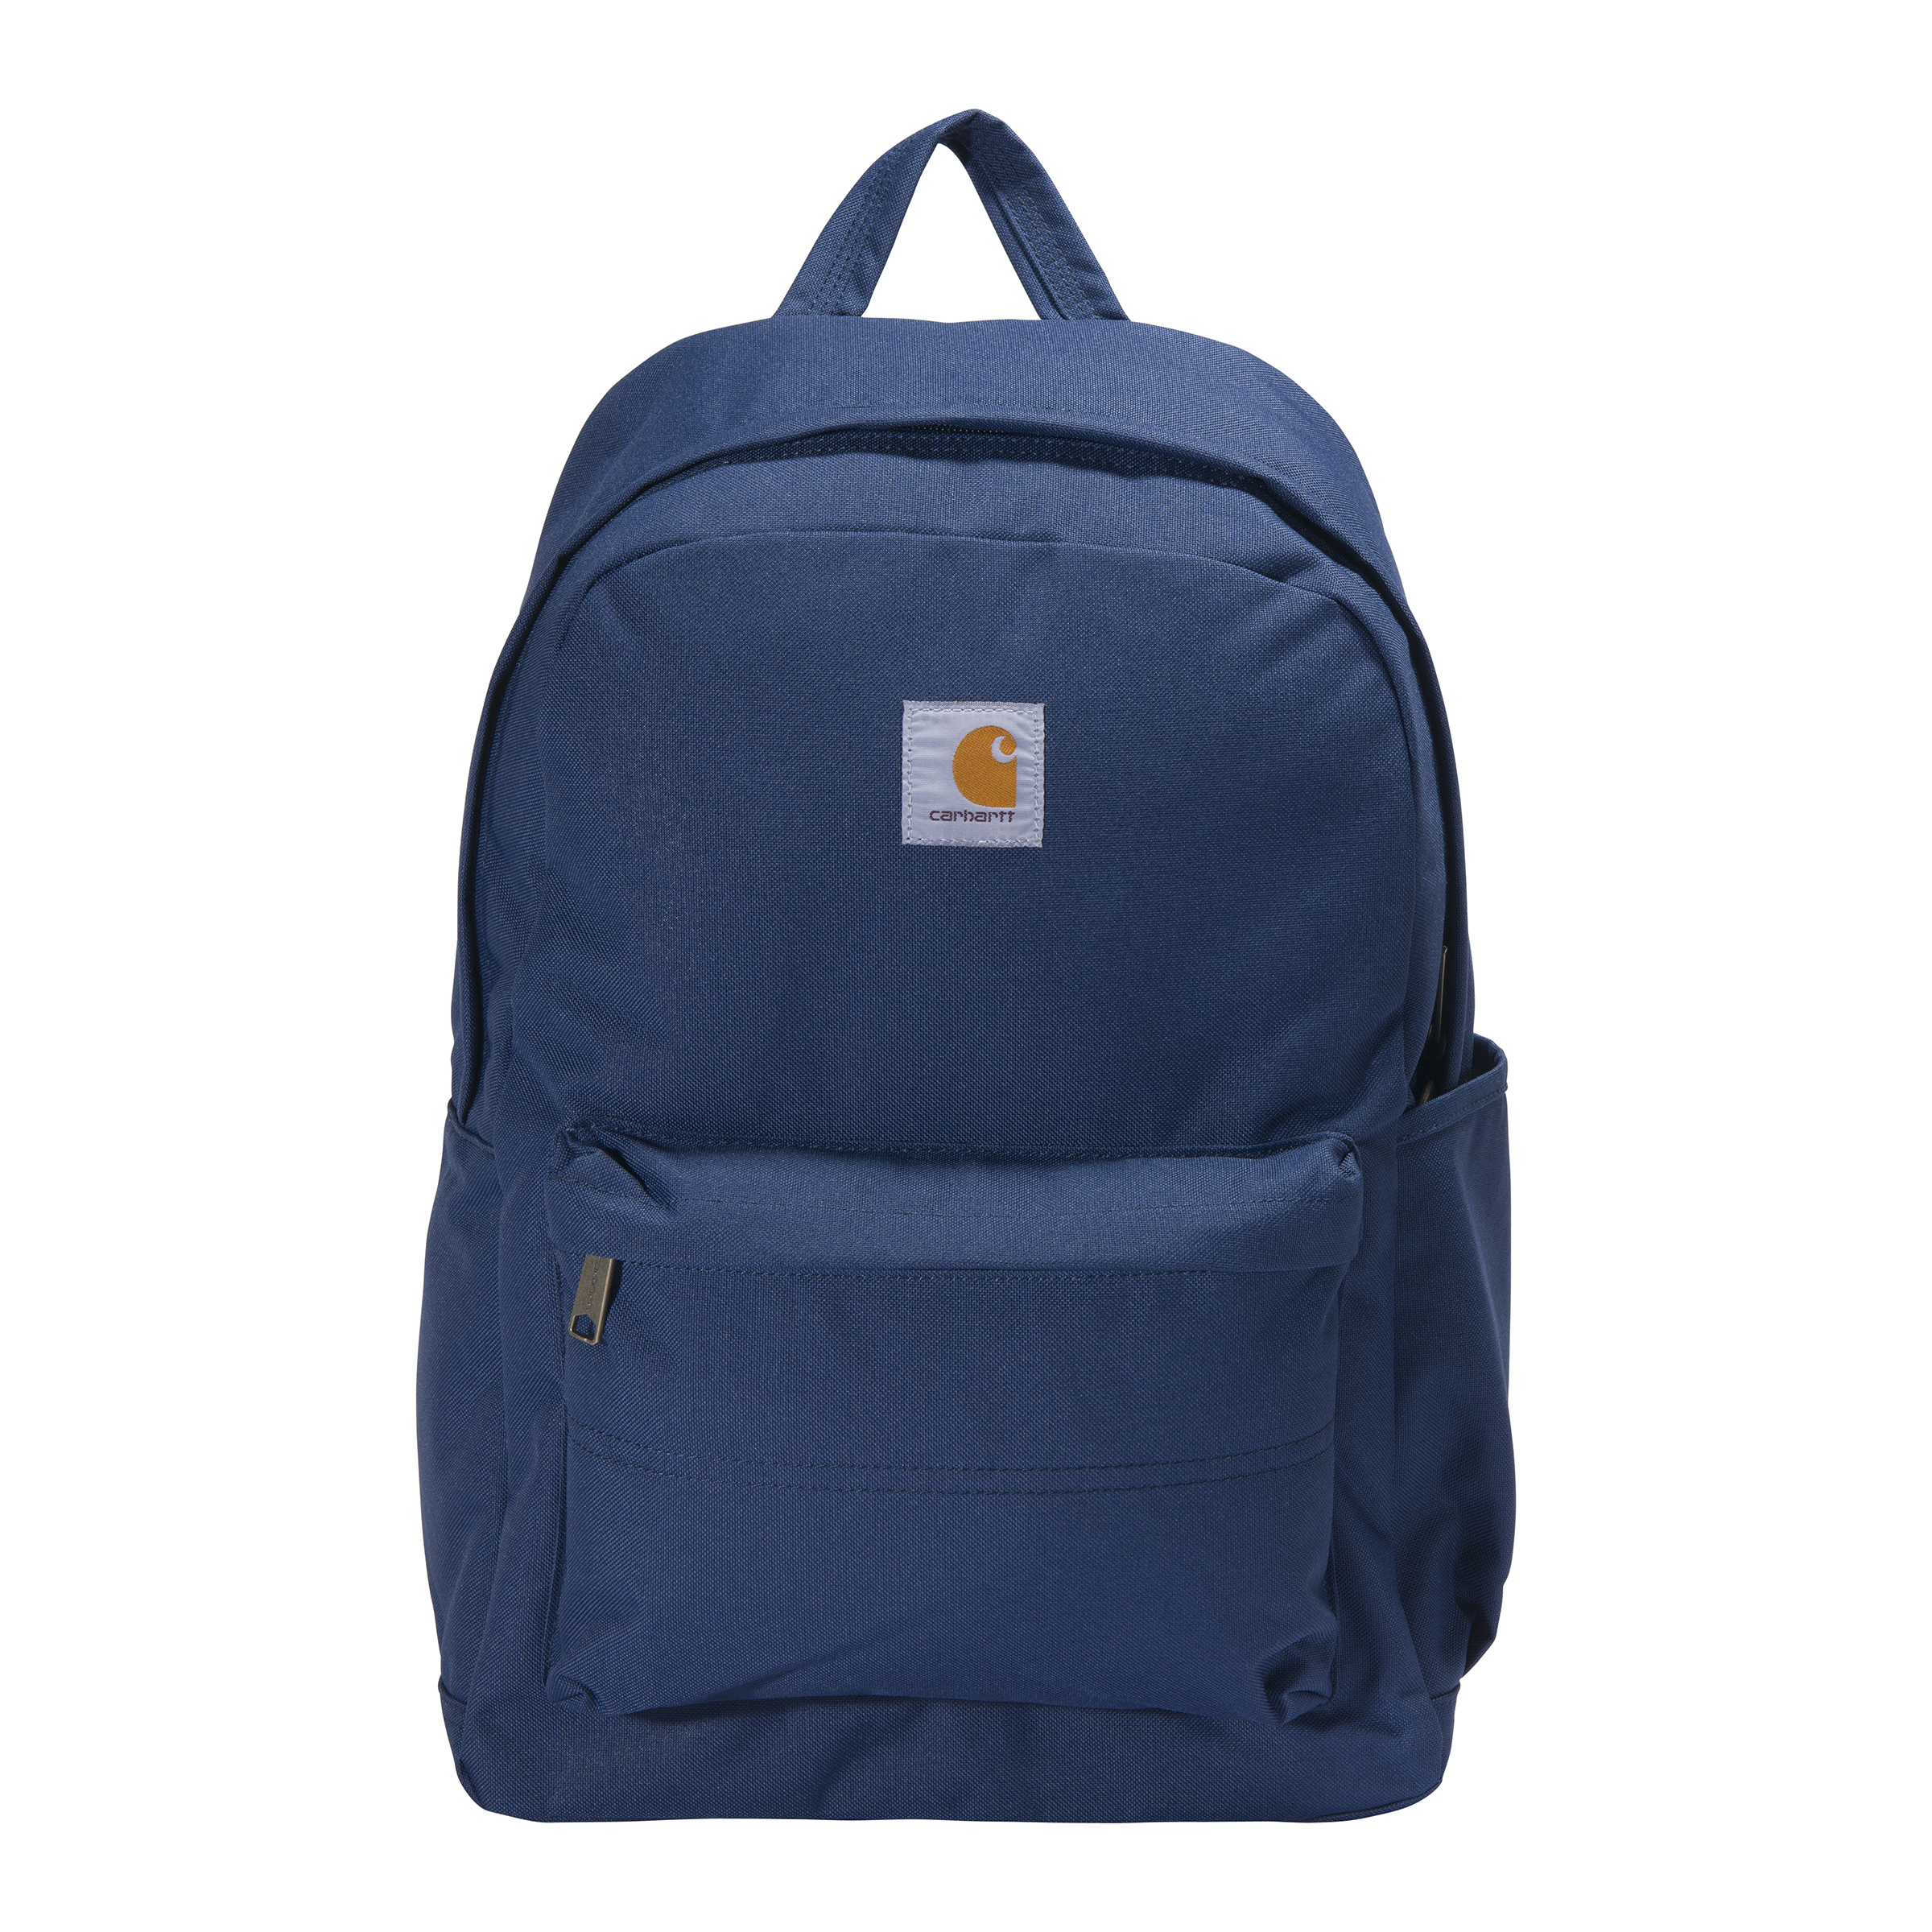 Picture of Carhartt B0000280 Mens 21L Classic Backpack